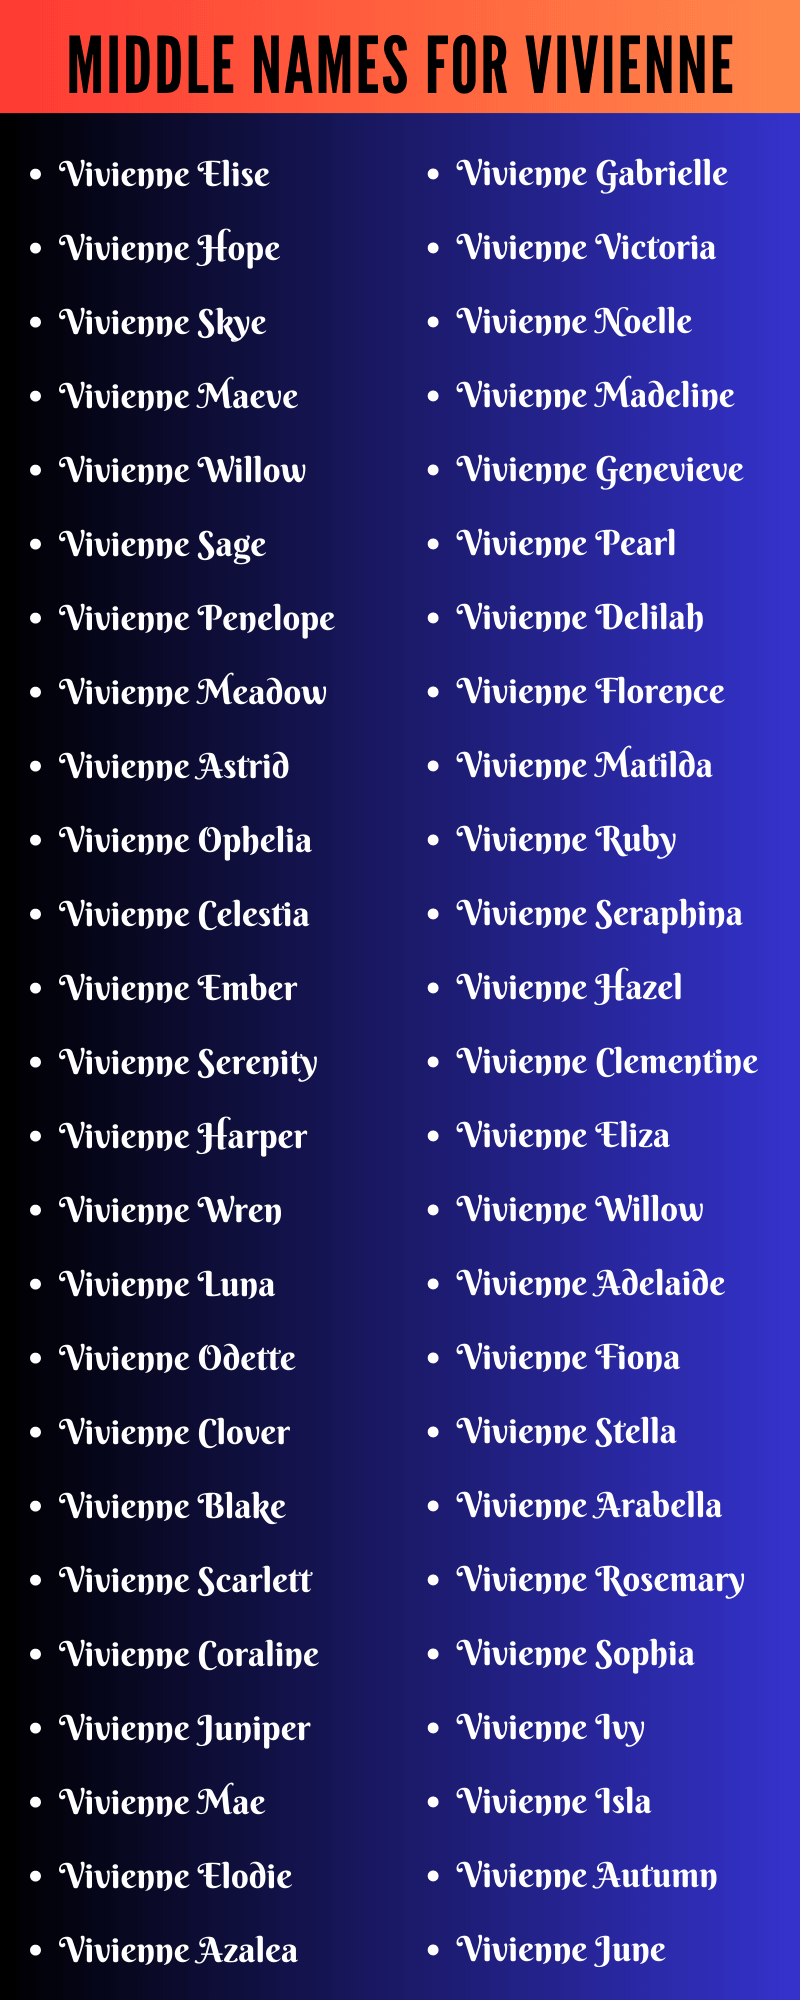 Middle Names For Vivienne